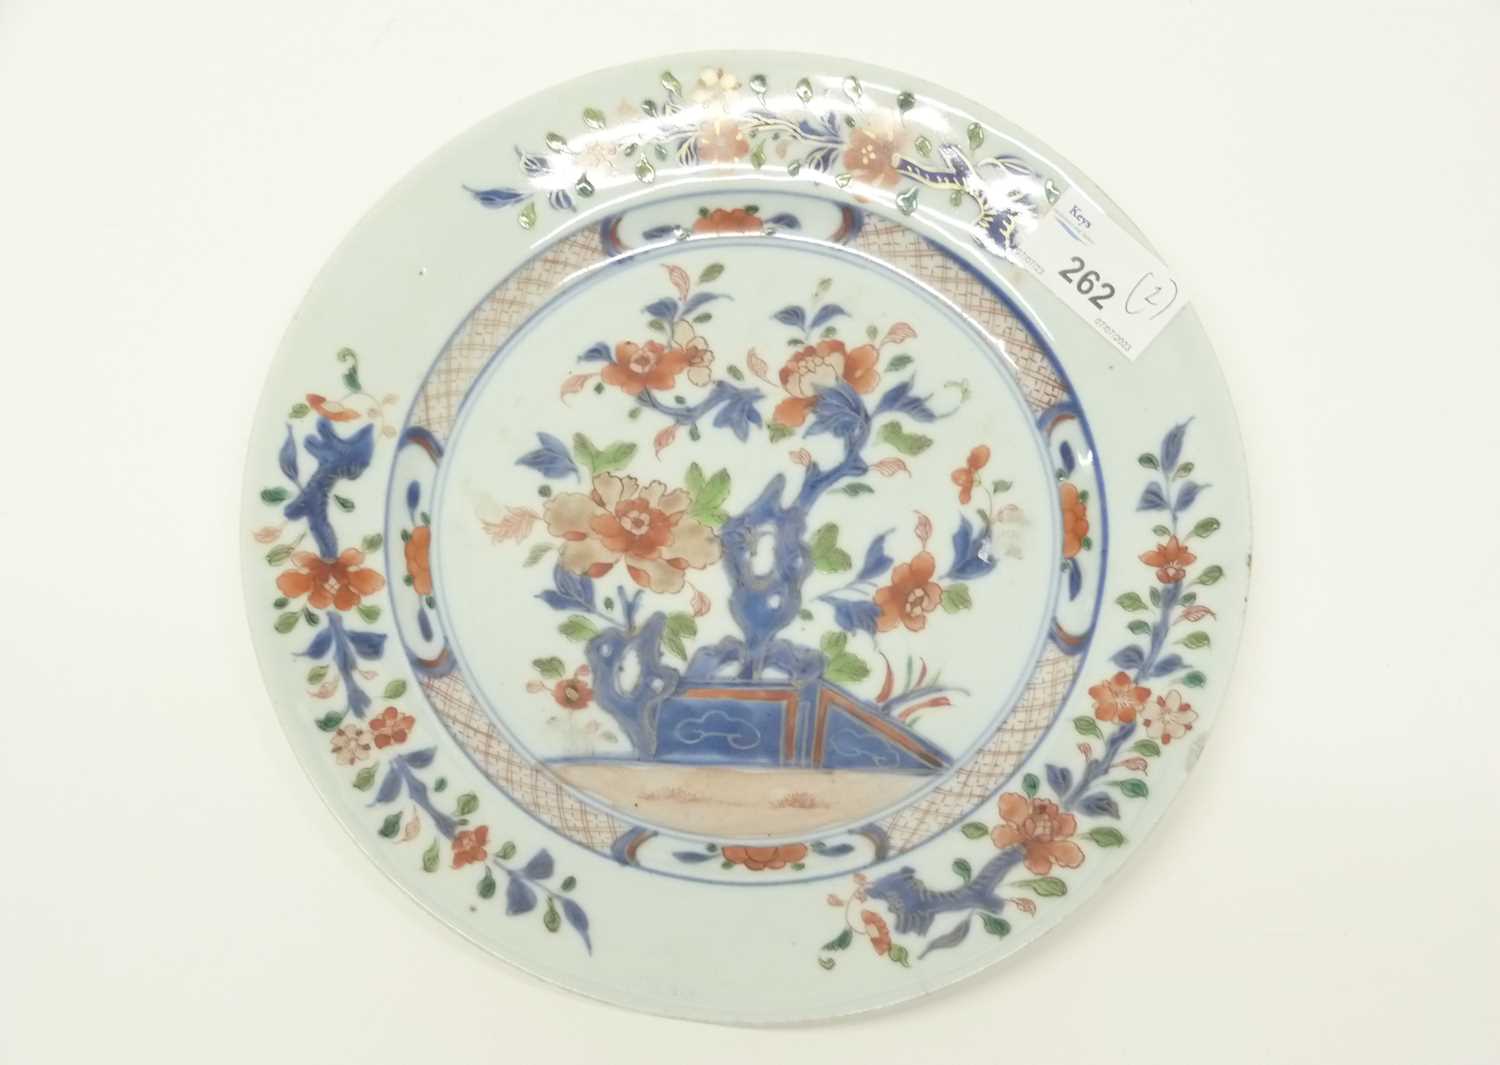 A 18th Century Chinese porcelain plate decorated in Imari style with blue and white trees and